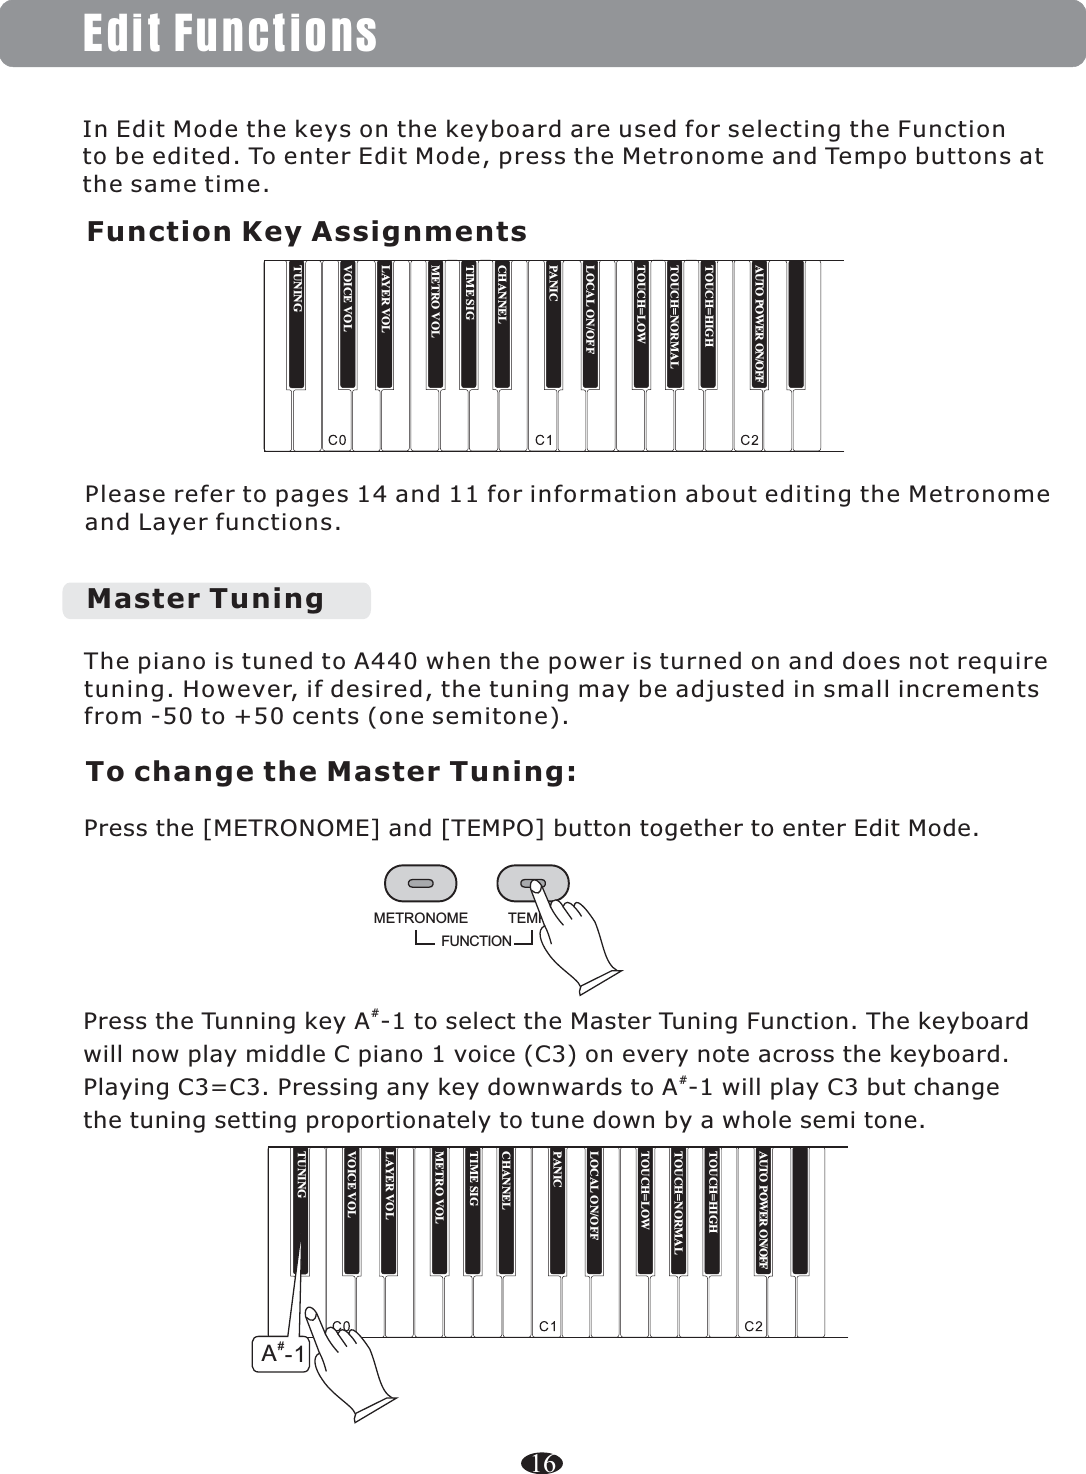 Edit FunctionsPlease refer to pages 14 and 11 for information about editing the Metronome and Layer functions.The piano is tuned to A440 when the power is turned on and does not require tuning. However, if desired, the tuning may be adjusted in small increments from -50 to +50 cents (one semitone).Master TuningFunction Key AssignmentsTo change the Master Tuning:Press the [METRONOME] and [TEMPO] button together to enter Edit Mode.In Edit Mode the keys on the keyboard are used for selecting the Function to be edited. To enter Edit Mode, press the Metronome and Tempo buttons at the same time.16FUNCTIONTEMPOMETRONOME#Press the Tunning key A -1 to select the Master Tuning Function. The keyboard will now play middle C piano 1 voice (C3) on every note across the keyboard. #Playing C3=C3. Pressing any key downwards to A -1 will play C3 but change the tuning setting proportionately to tune down by a whole semi tone. TUNINGTOUCH=HIGHTOUCH=NORMALTOUCH=LOWLOCAL ON/OFFPANICCHANNELTIME SIGMETRO VOLLAYER VOLVOICE VOLAUTO POWER ON/OFFTUNINGTOUCH=HIGHTOUCH=NORMALTOUCH=LOWLOCAL ON/OFFPANICCHANNELTIME SIGMETRO VOLLAYER VOLVOICE VOL#-1AAUTO POWER  ON/OFF